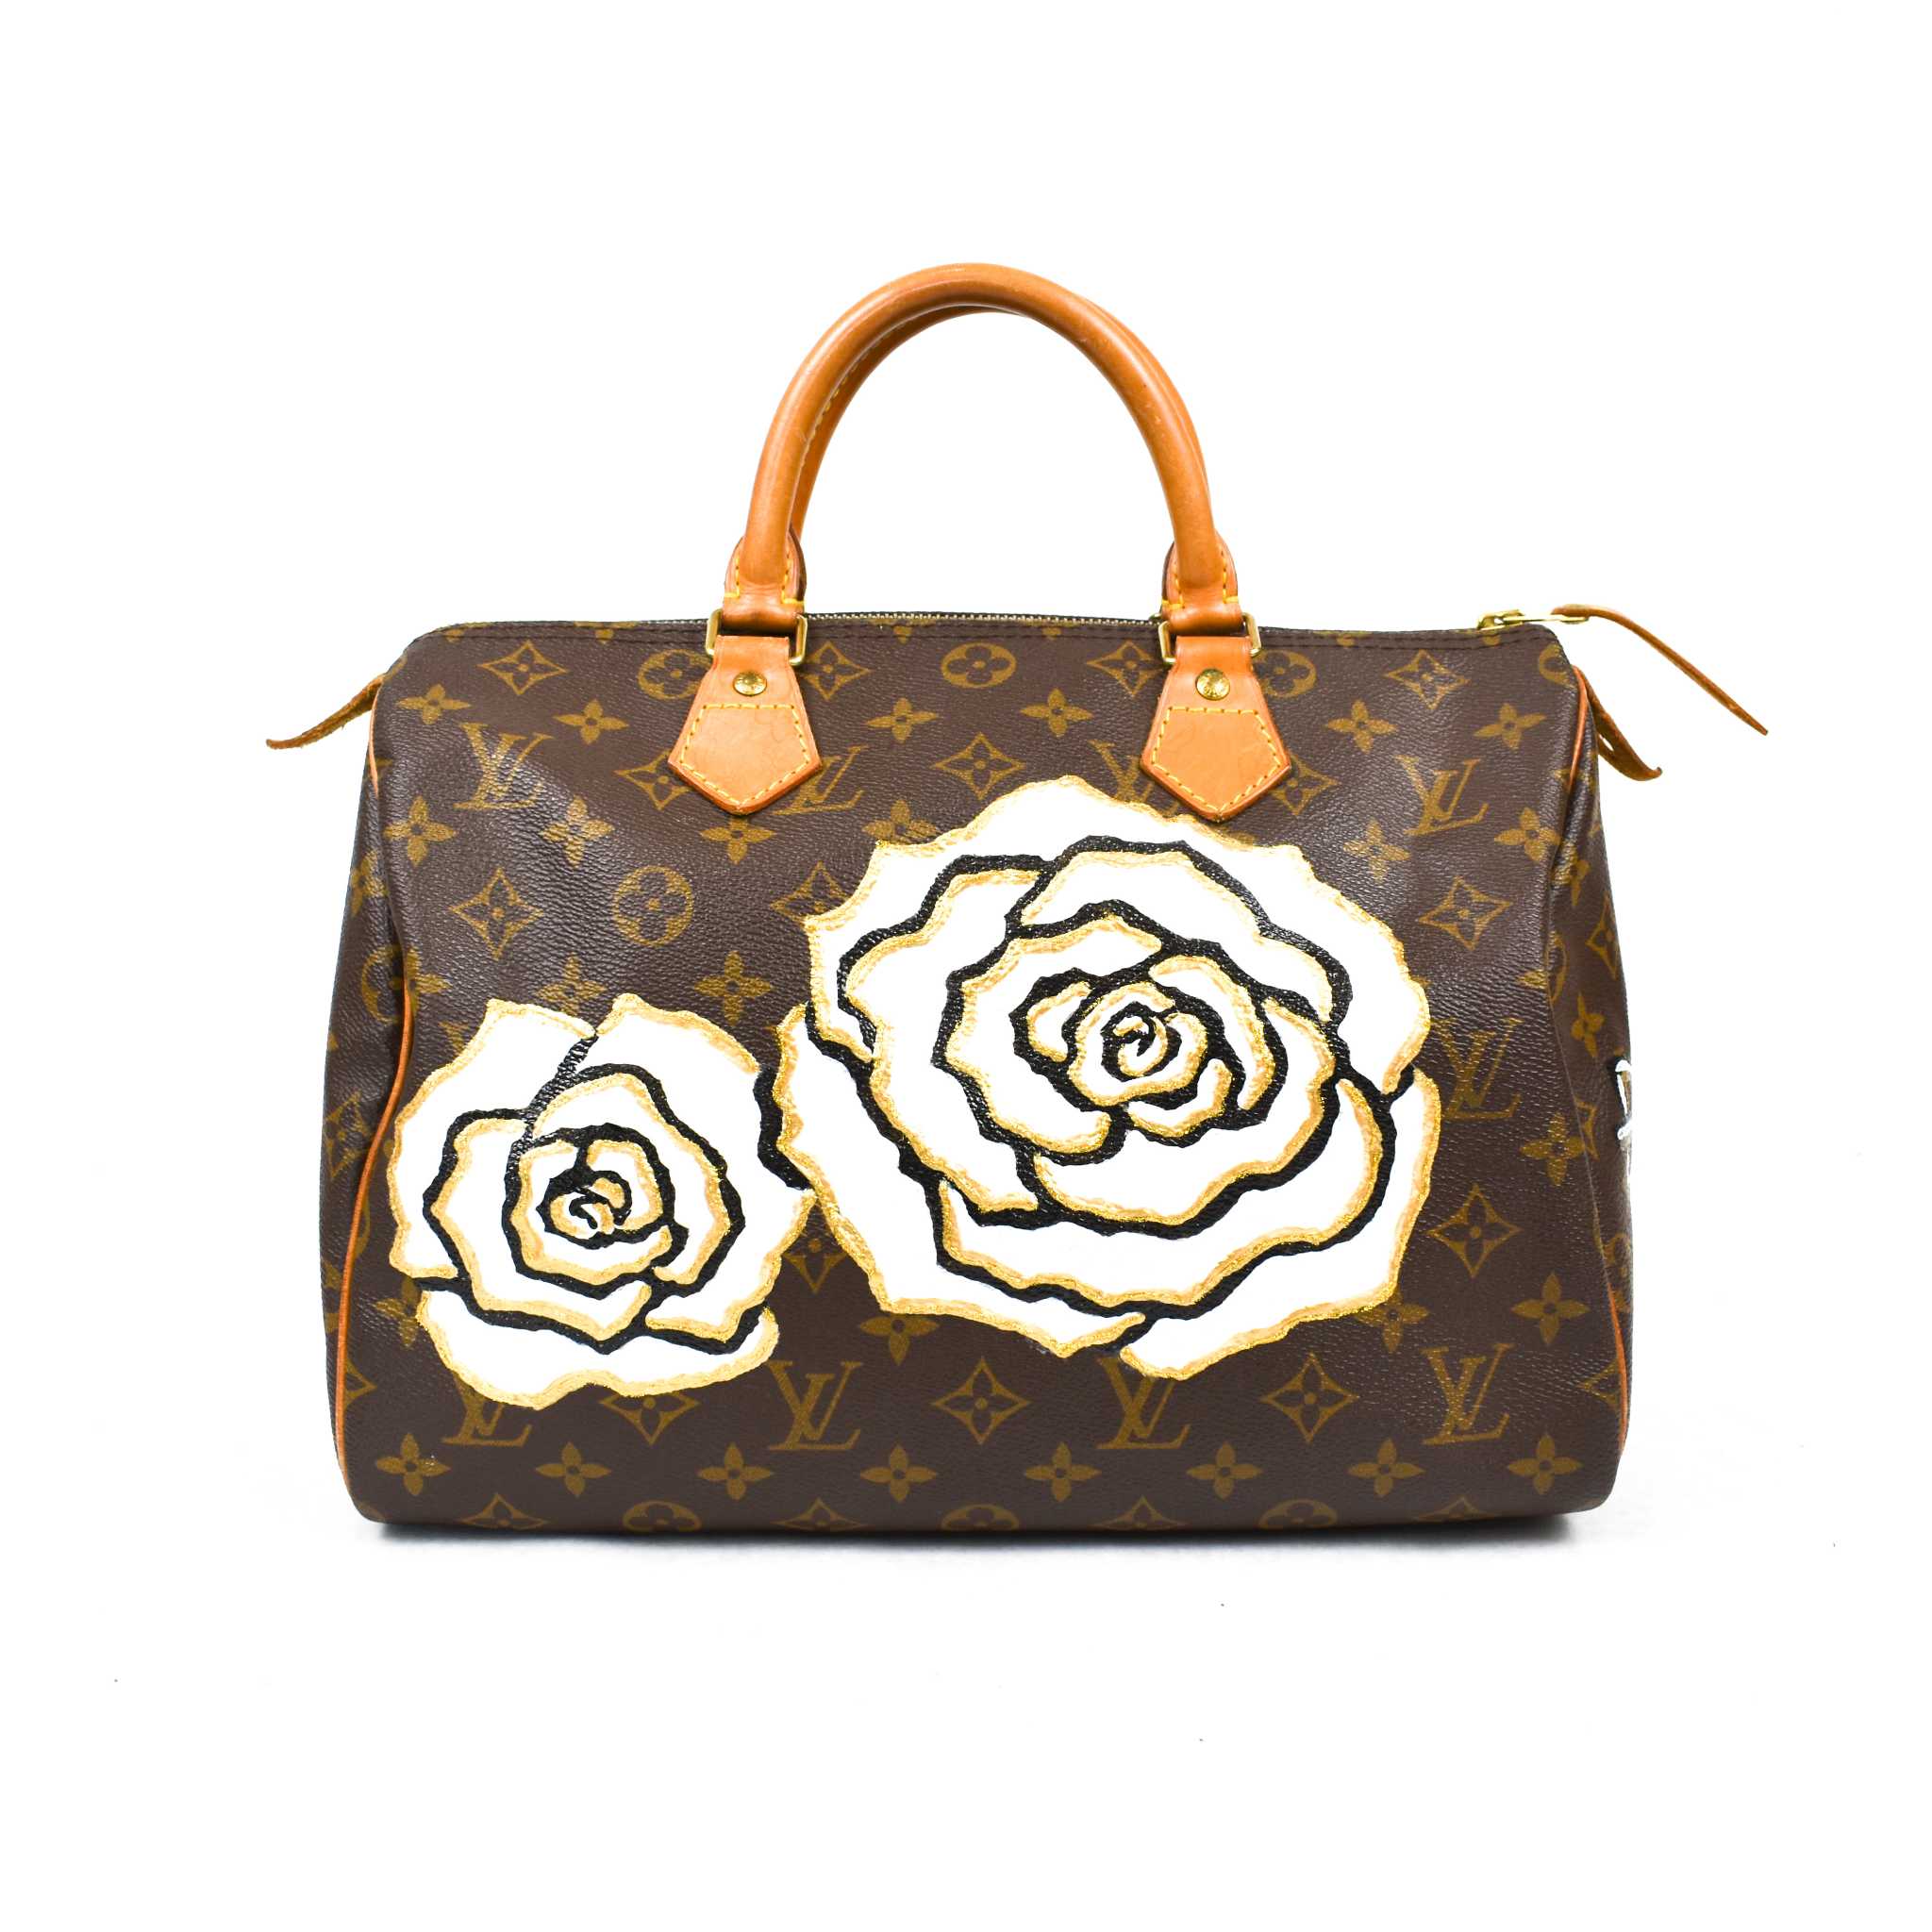 The new monogram: Designer bags customized by Texas artists are swinging up - www.bagssaleusa.com